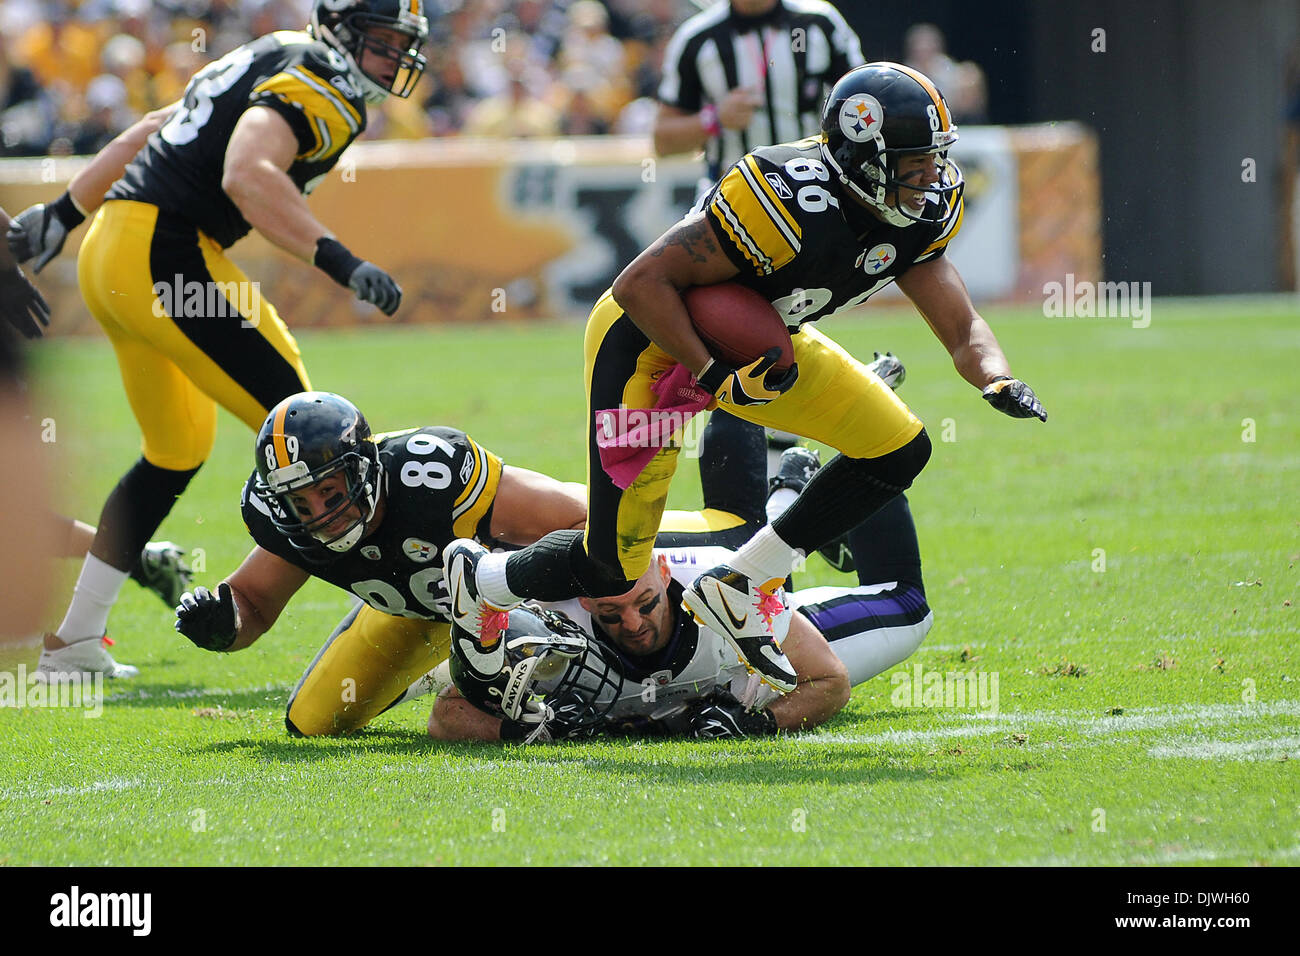 Oct. 3, 2010 - Pittsburgh, PENNSYLVANNIA, United States of America - Pittsburgh Steelers' wide receiver HINES WARD (86) escapes a tackle by Baltimore Ravens' linebacker JARRET JOHNSON (95) in the first quarter as the Steelers take on the Ravens at Heinz Field in Pittsburgh, PA....The Ravens defeat the Steelers, 17-14. (Credit Image: © Dean Beattie/Southcreek Global/ZUMApress.com) Stock Photo